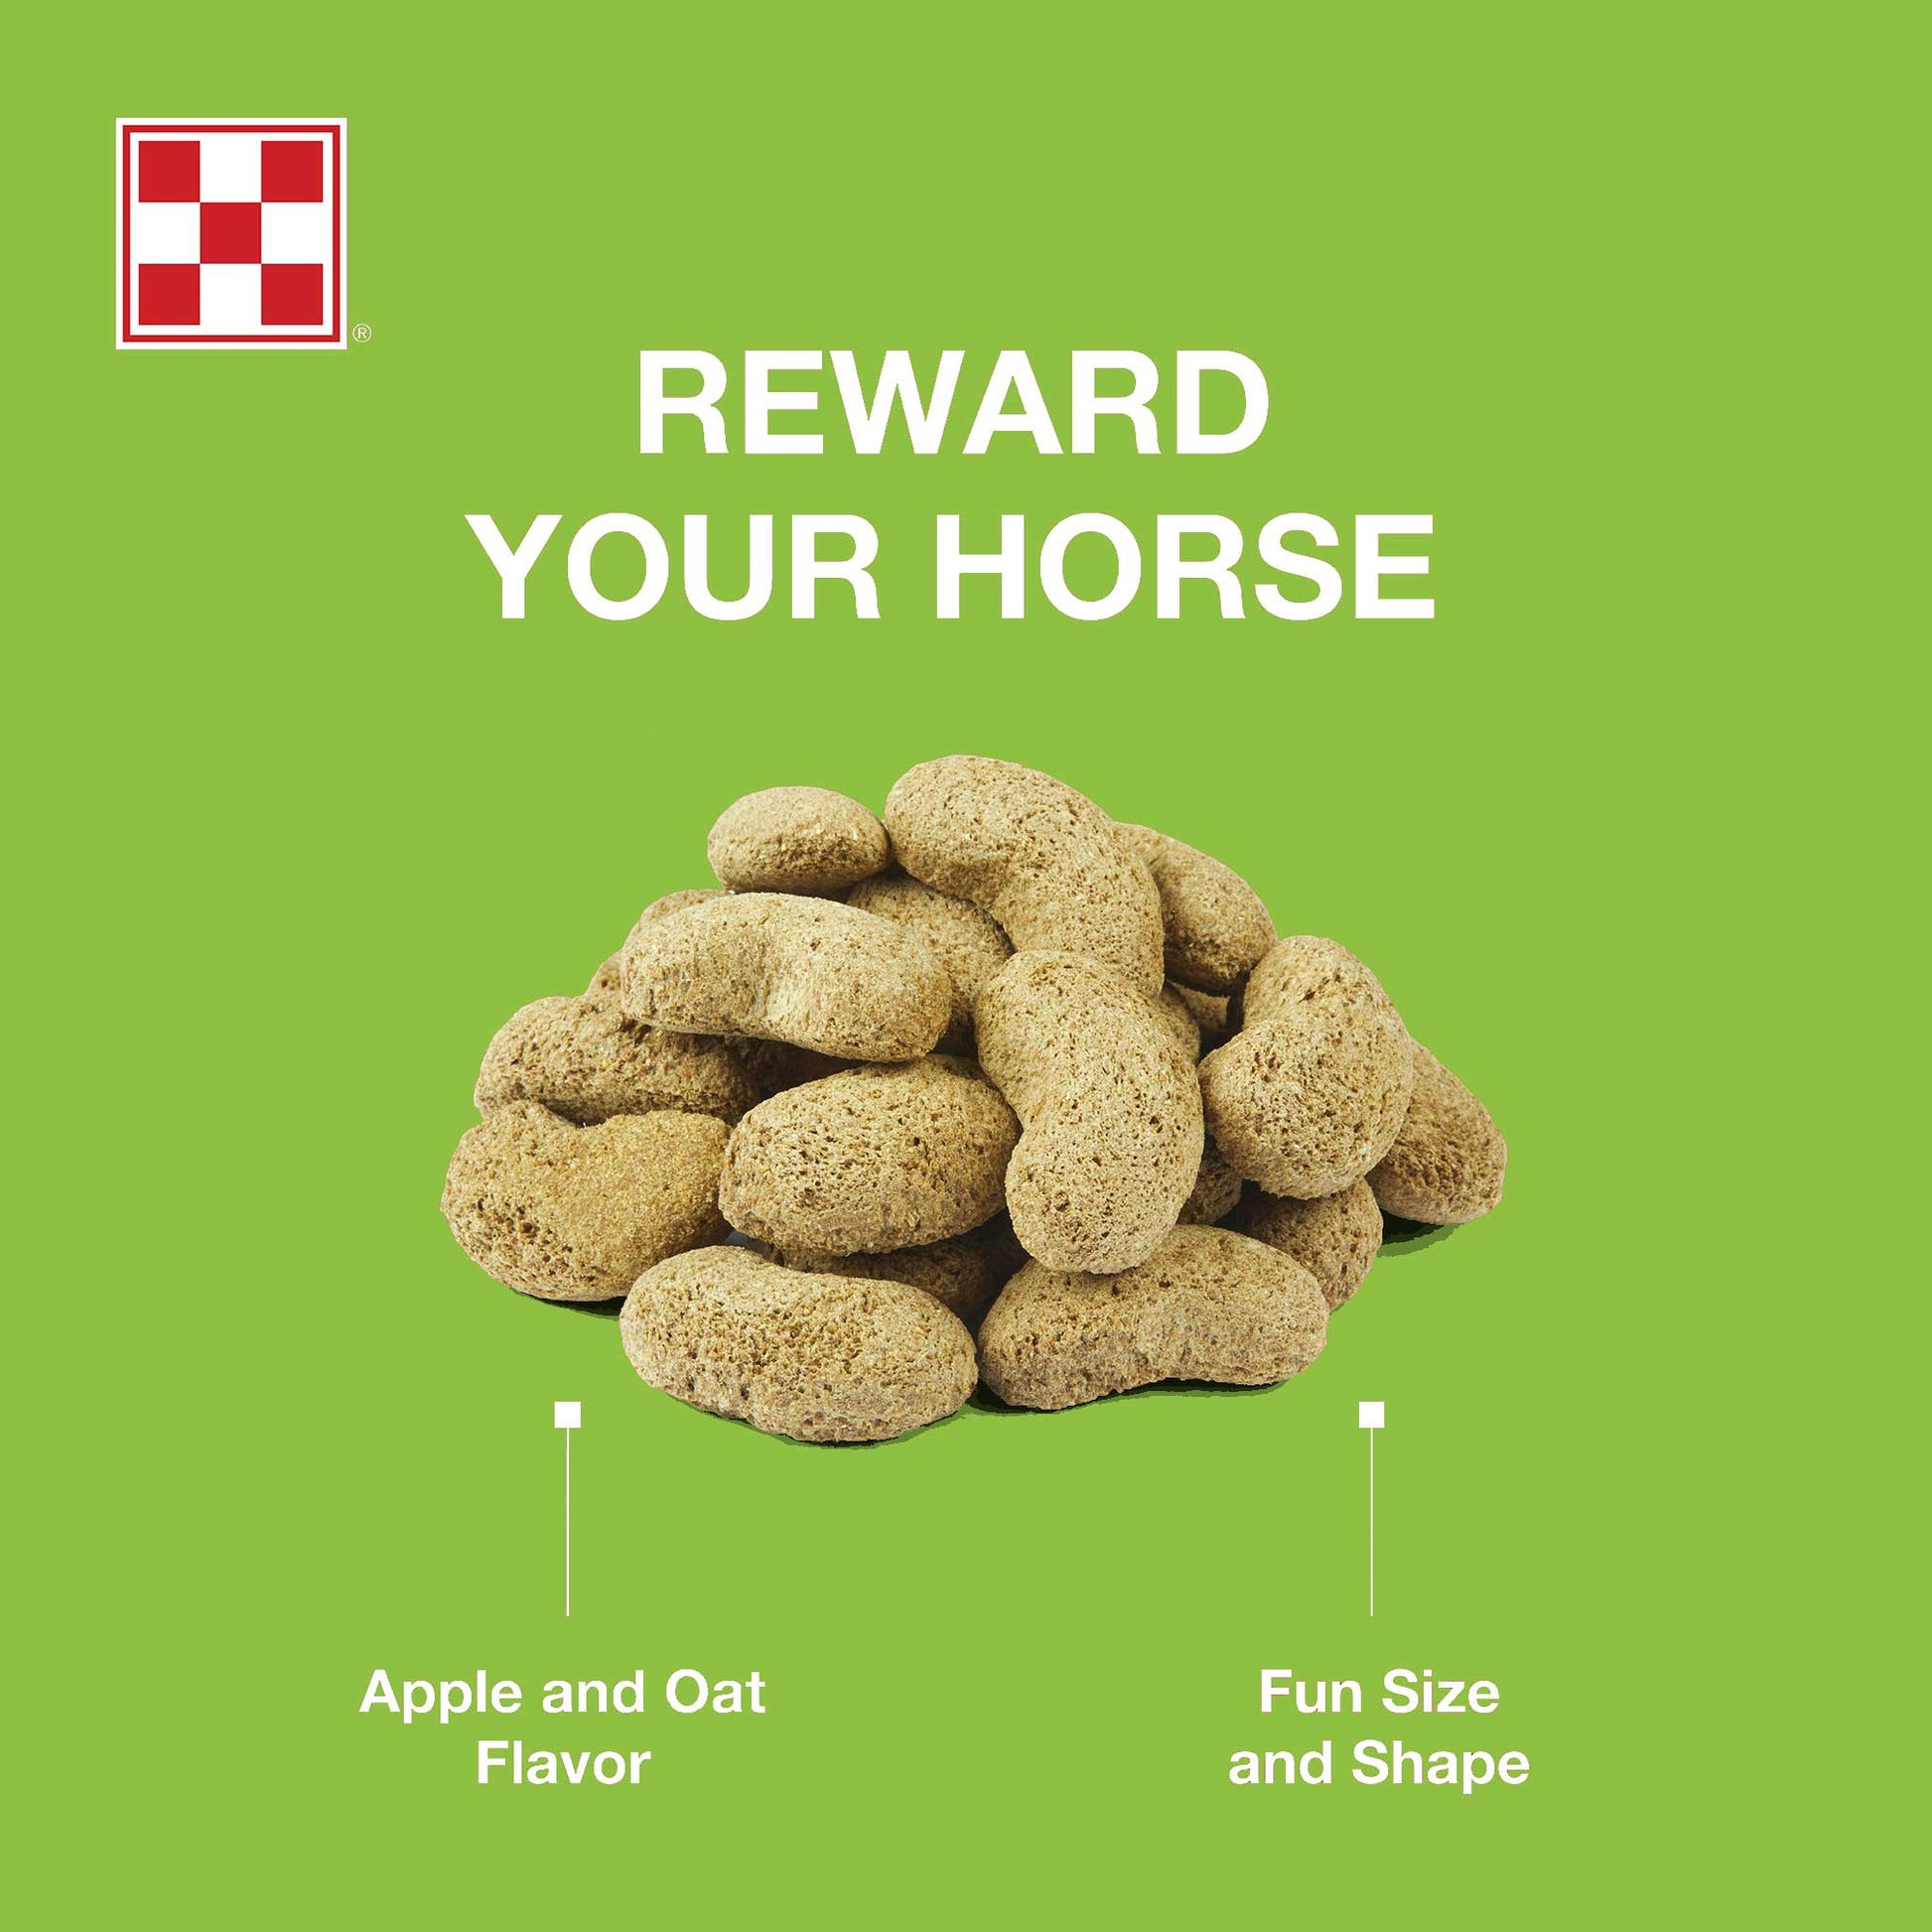 Horse Treats on a bright green background